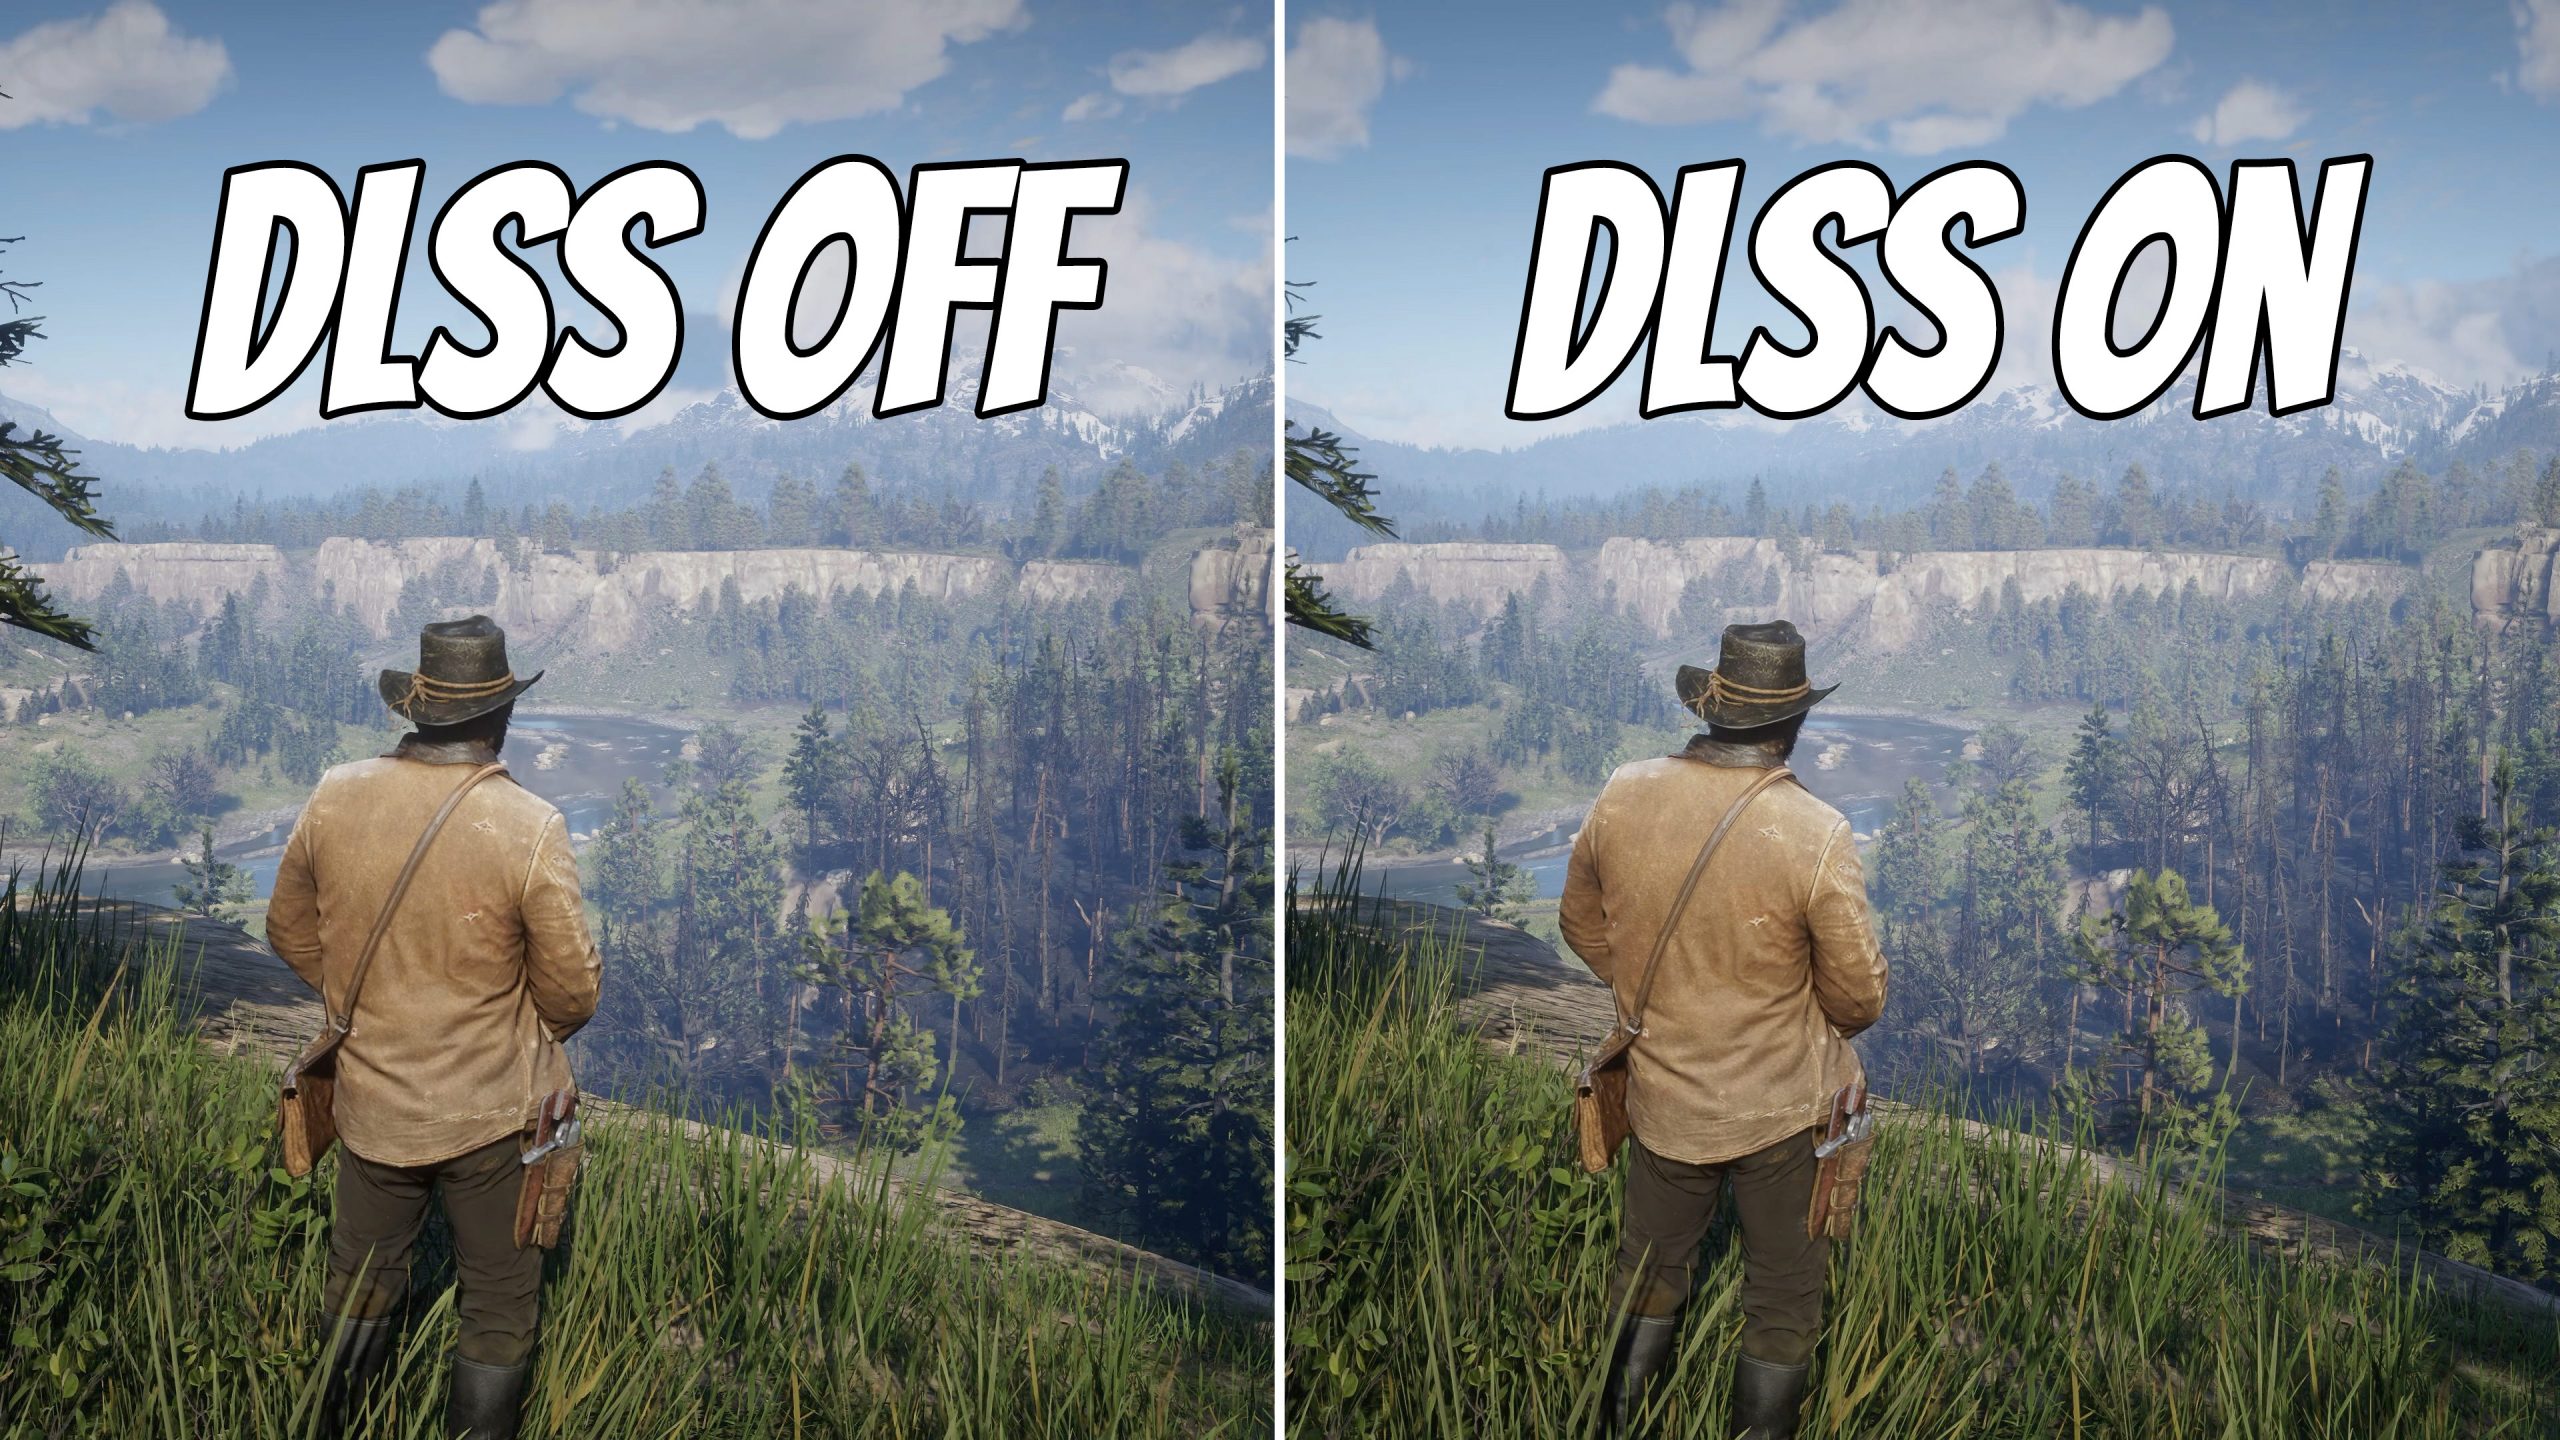 DLSS in Red Dead Redemption 2 Image Quality Comparison : r/nvidia